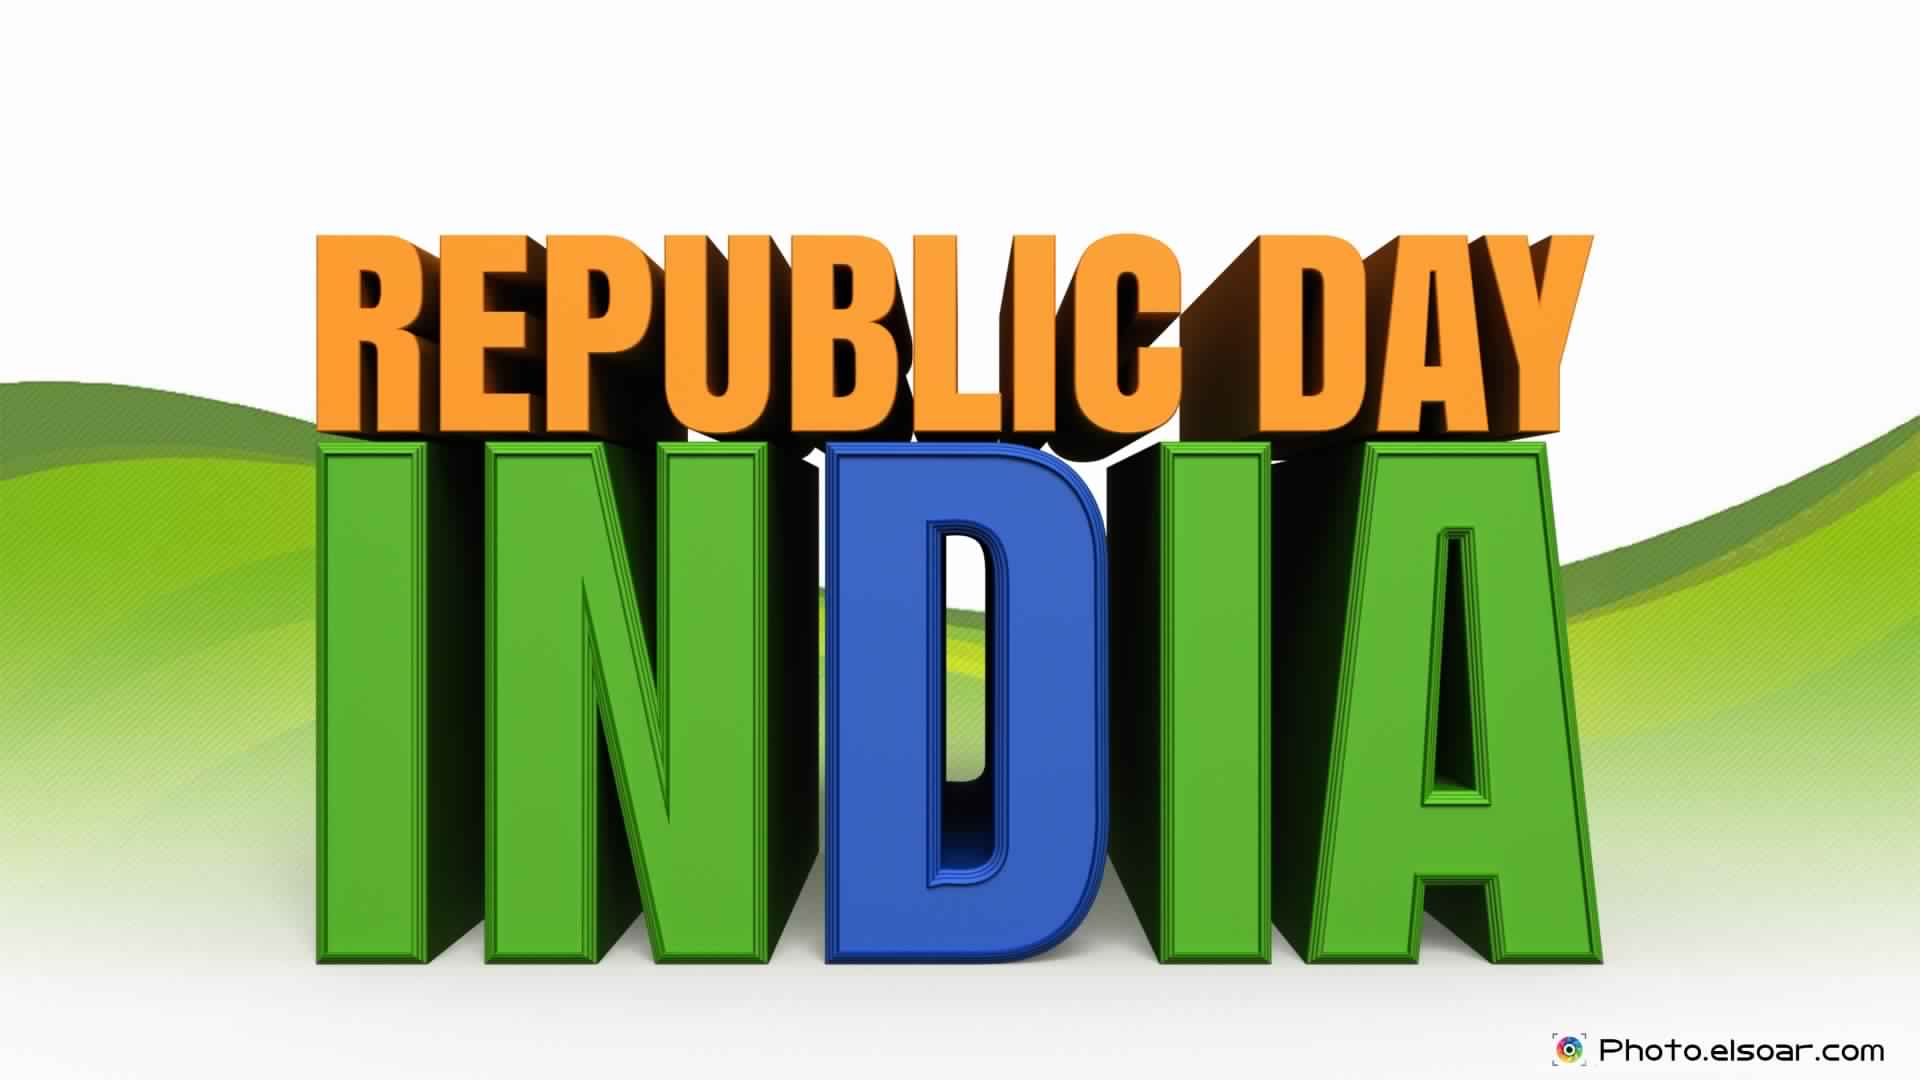 India Republic Day Image With Saffron Green Blue Colors 26 January